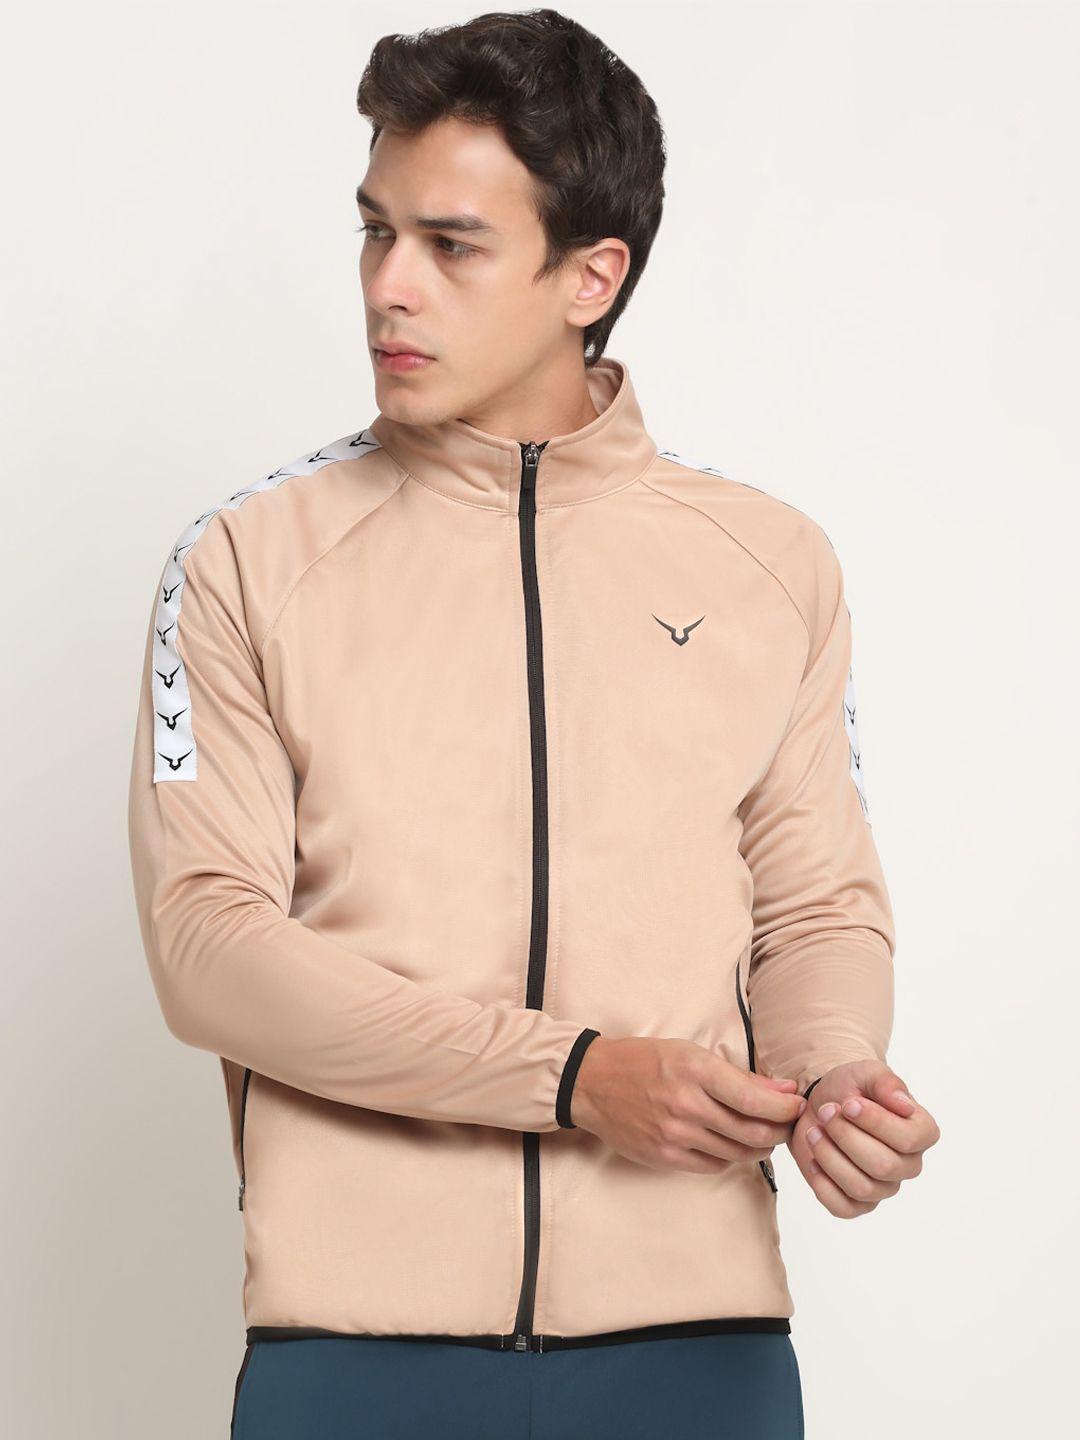 invincible men peach-coloured training or gym sporty jacket